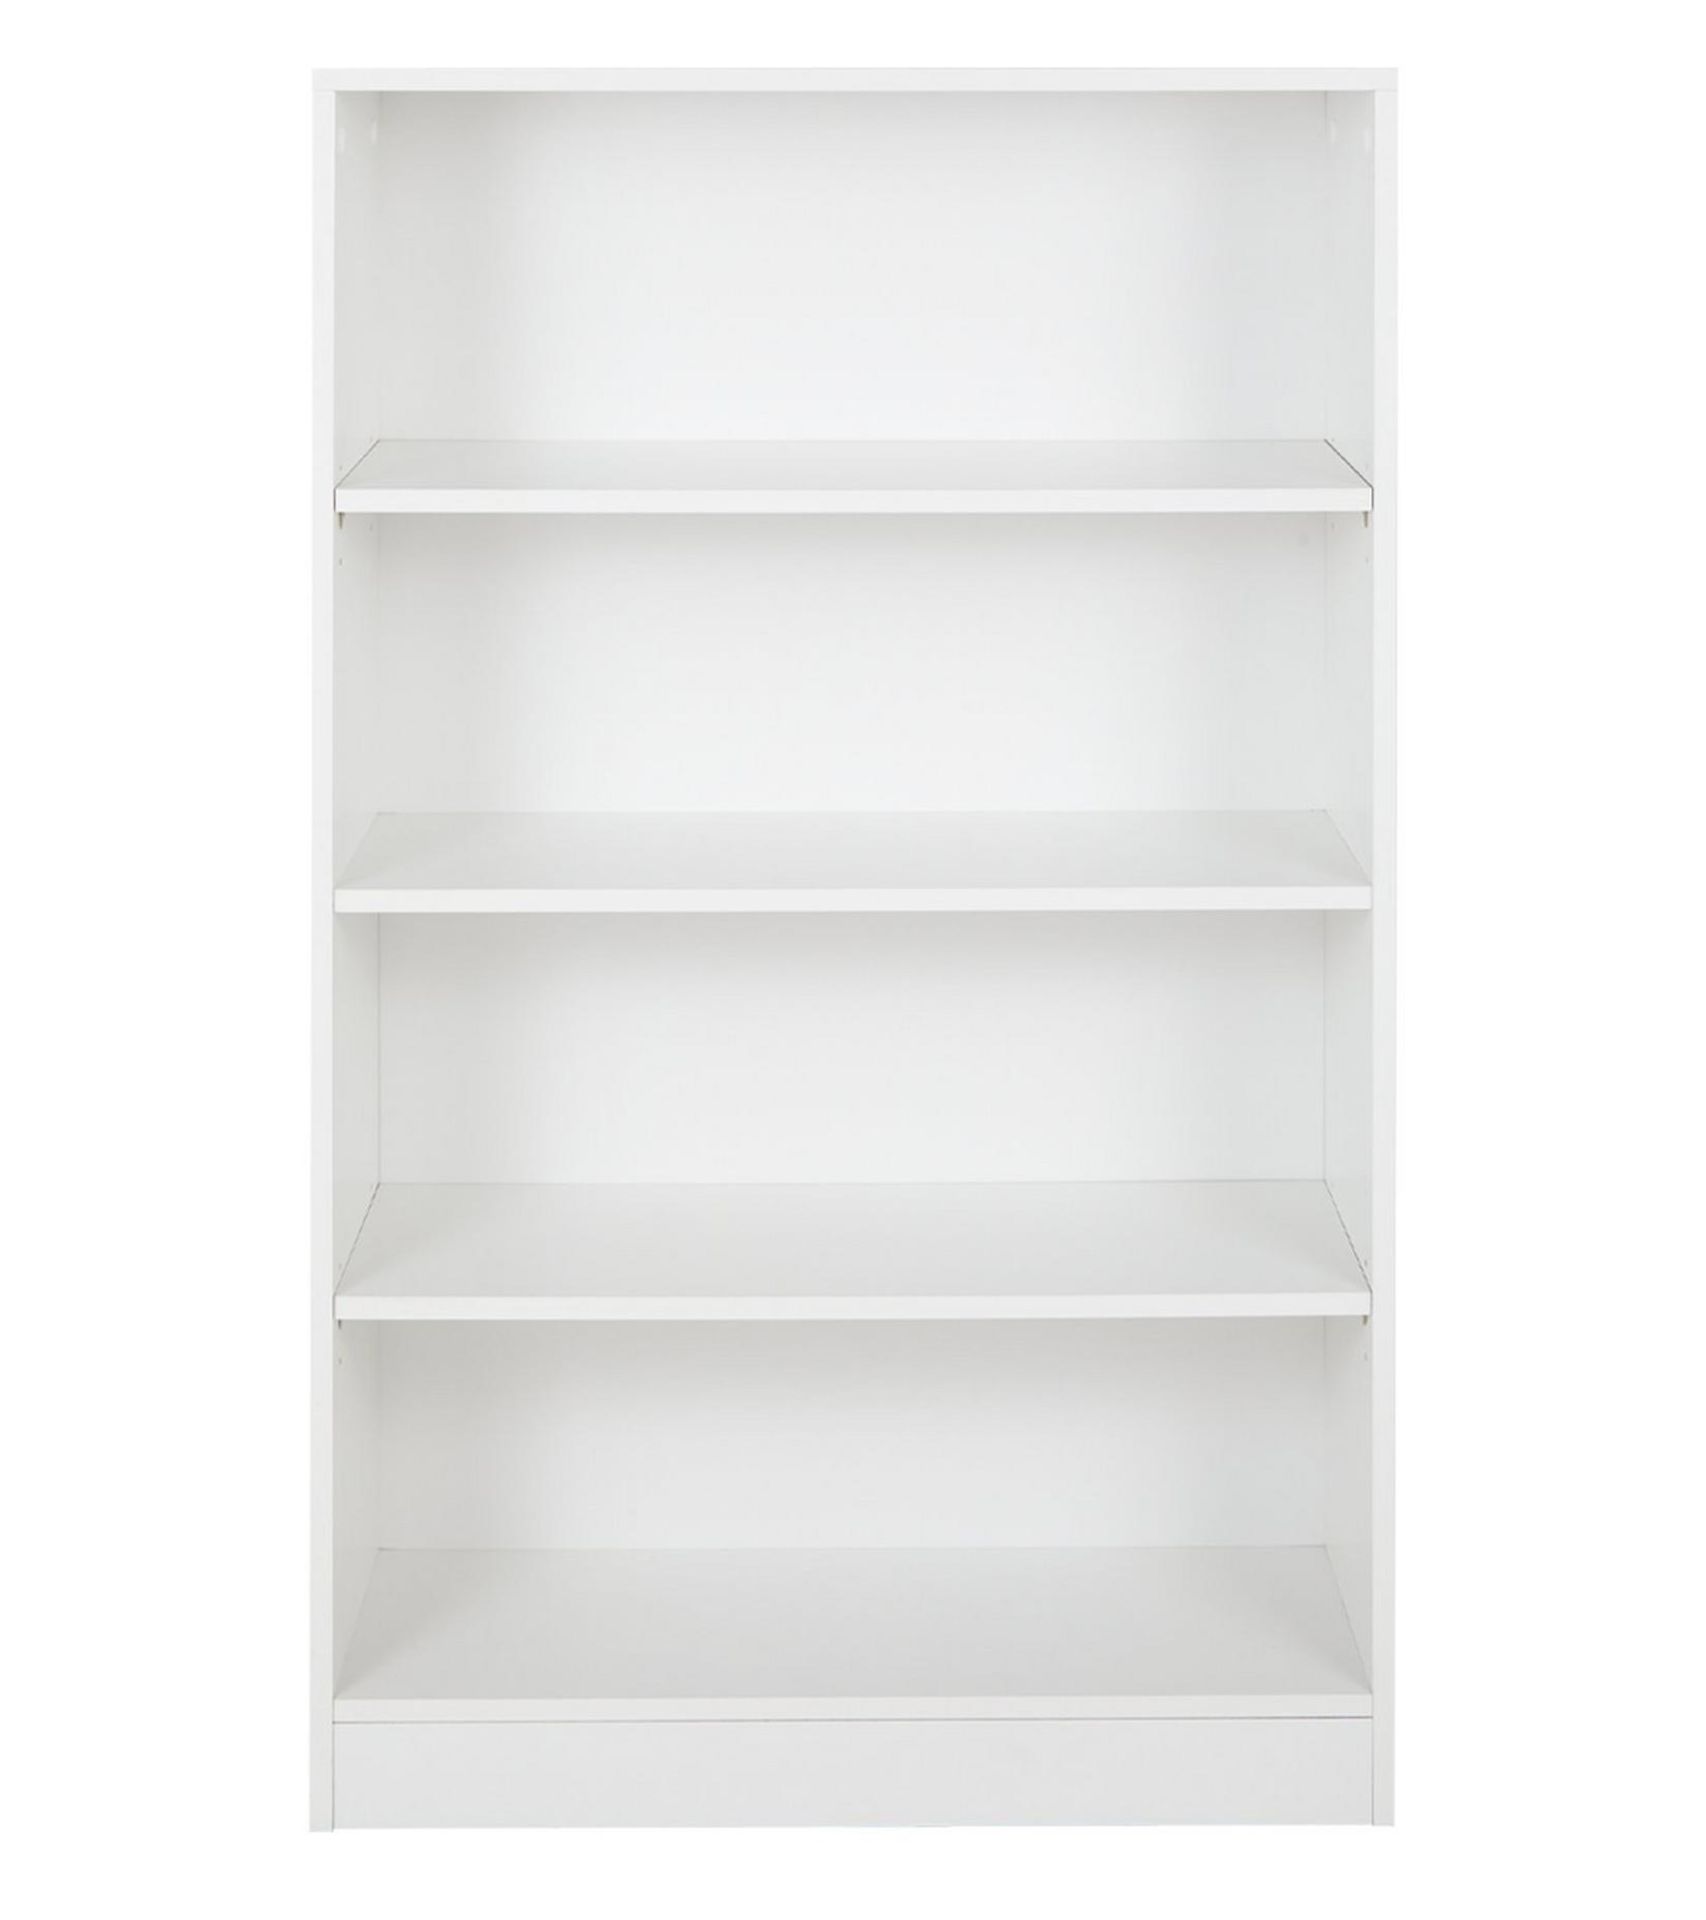 A1 PRODUCT NEW - METRO 3 PIECE STORGAGE BOOKCASE SET IN WHITE - RRP Ã‚Â£189 - Image 4 of 5